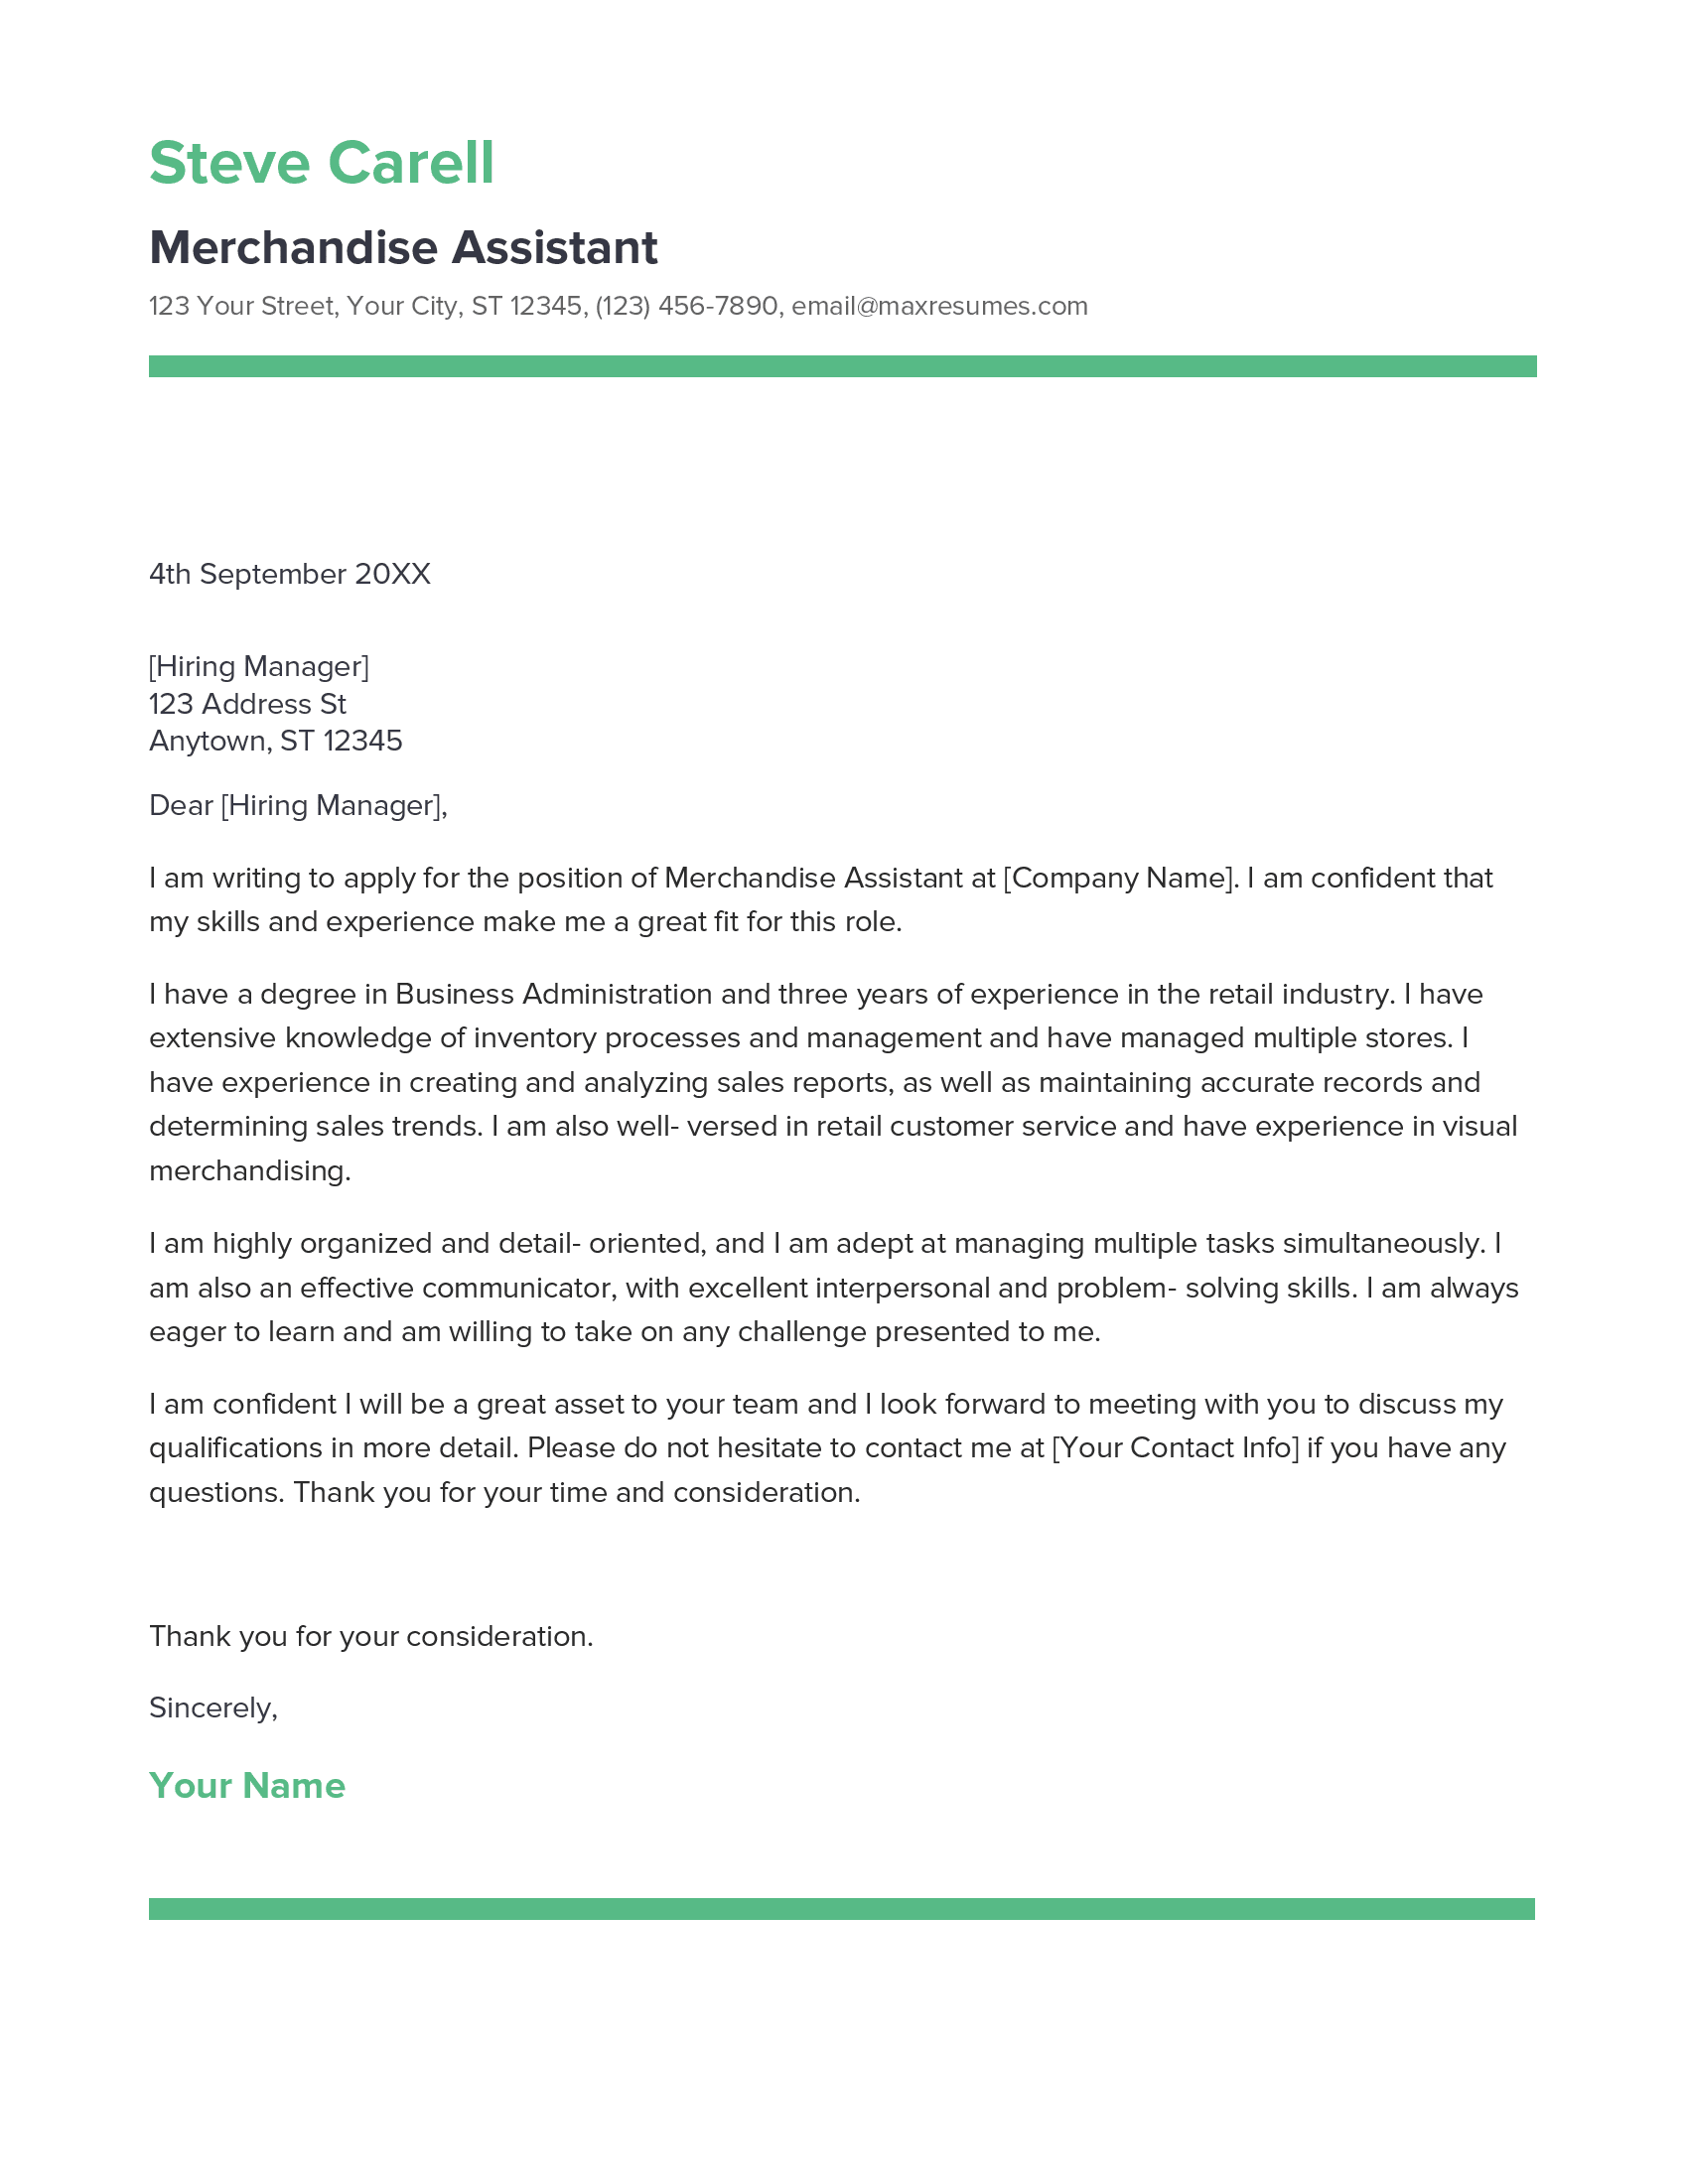 Merchandise Assistant Cover Letter Example